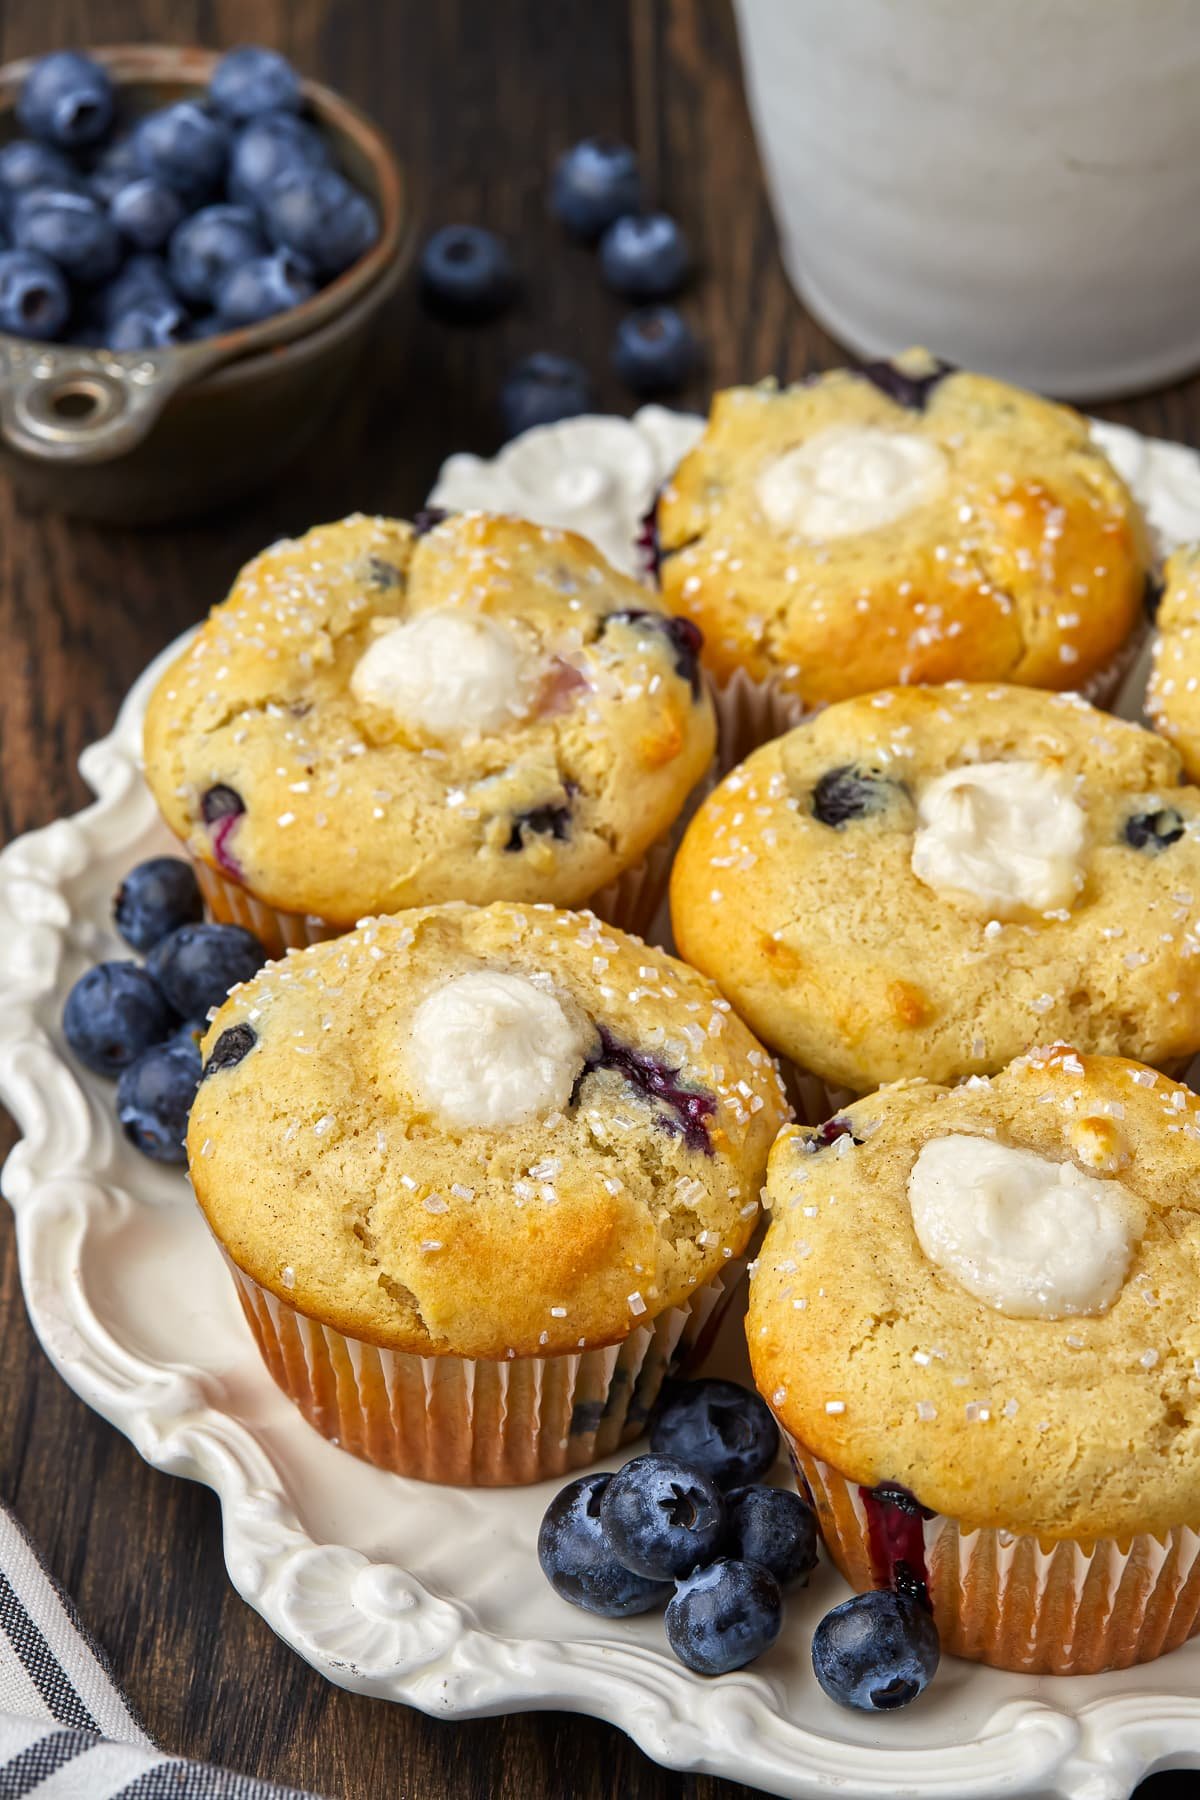 Blueberry cream cheese muffins sitting on a decorative white plate on a dark wooden tabletop with a measuring cup full of blueberries